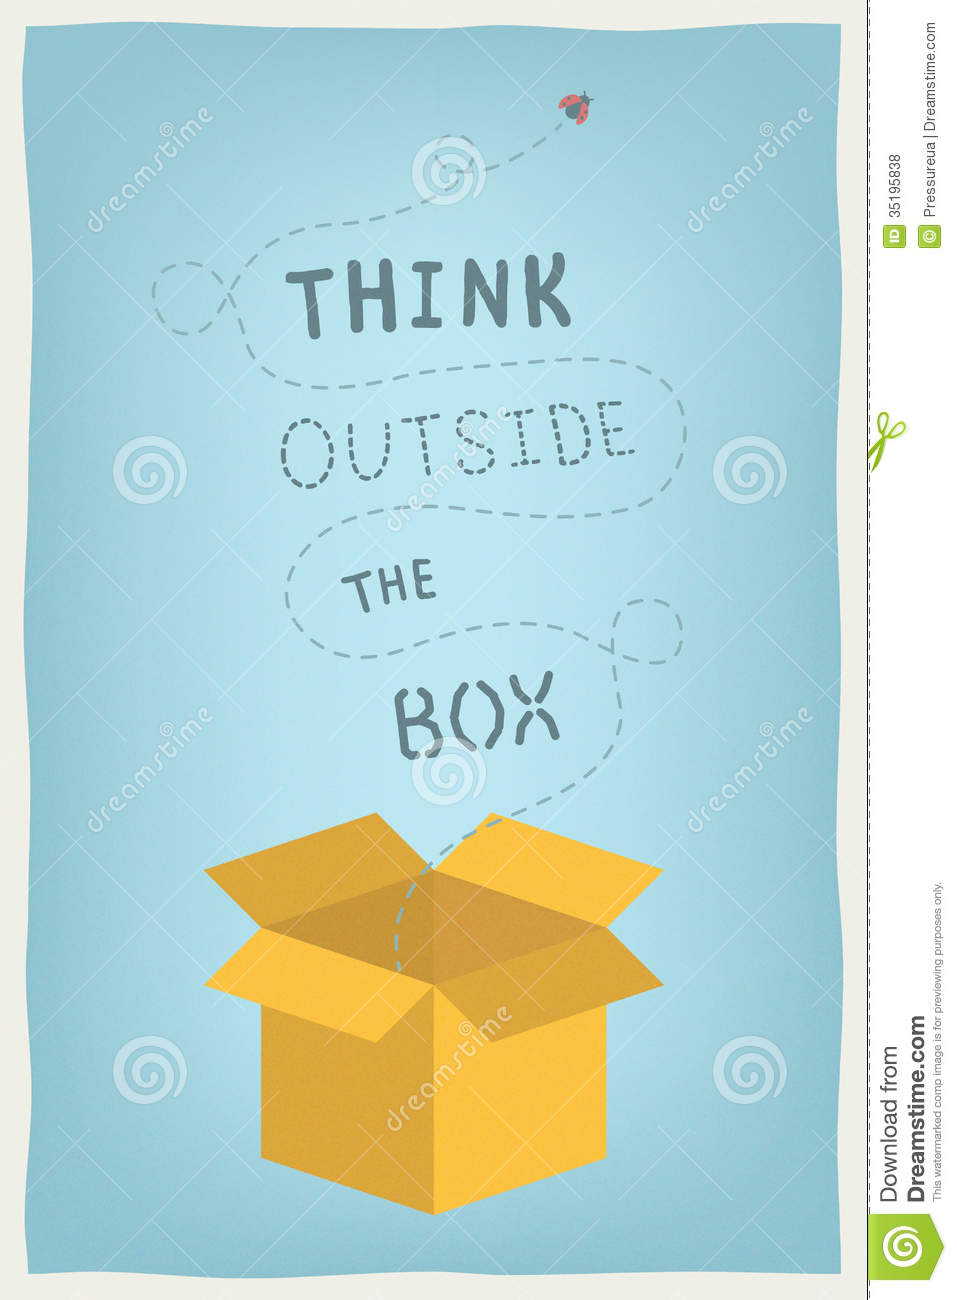 Think Outside The Box   Isolated On Stylish Colored Background